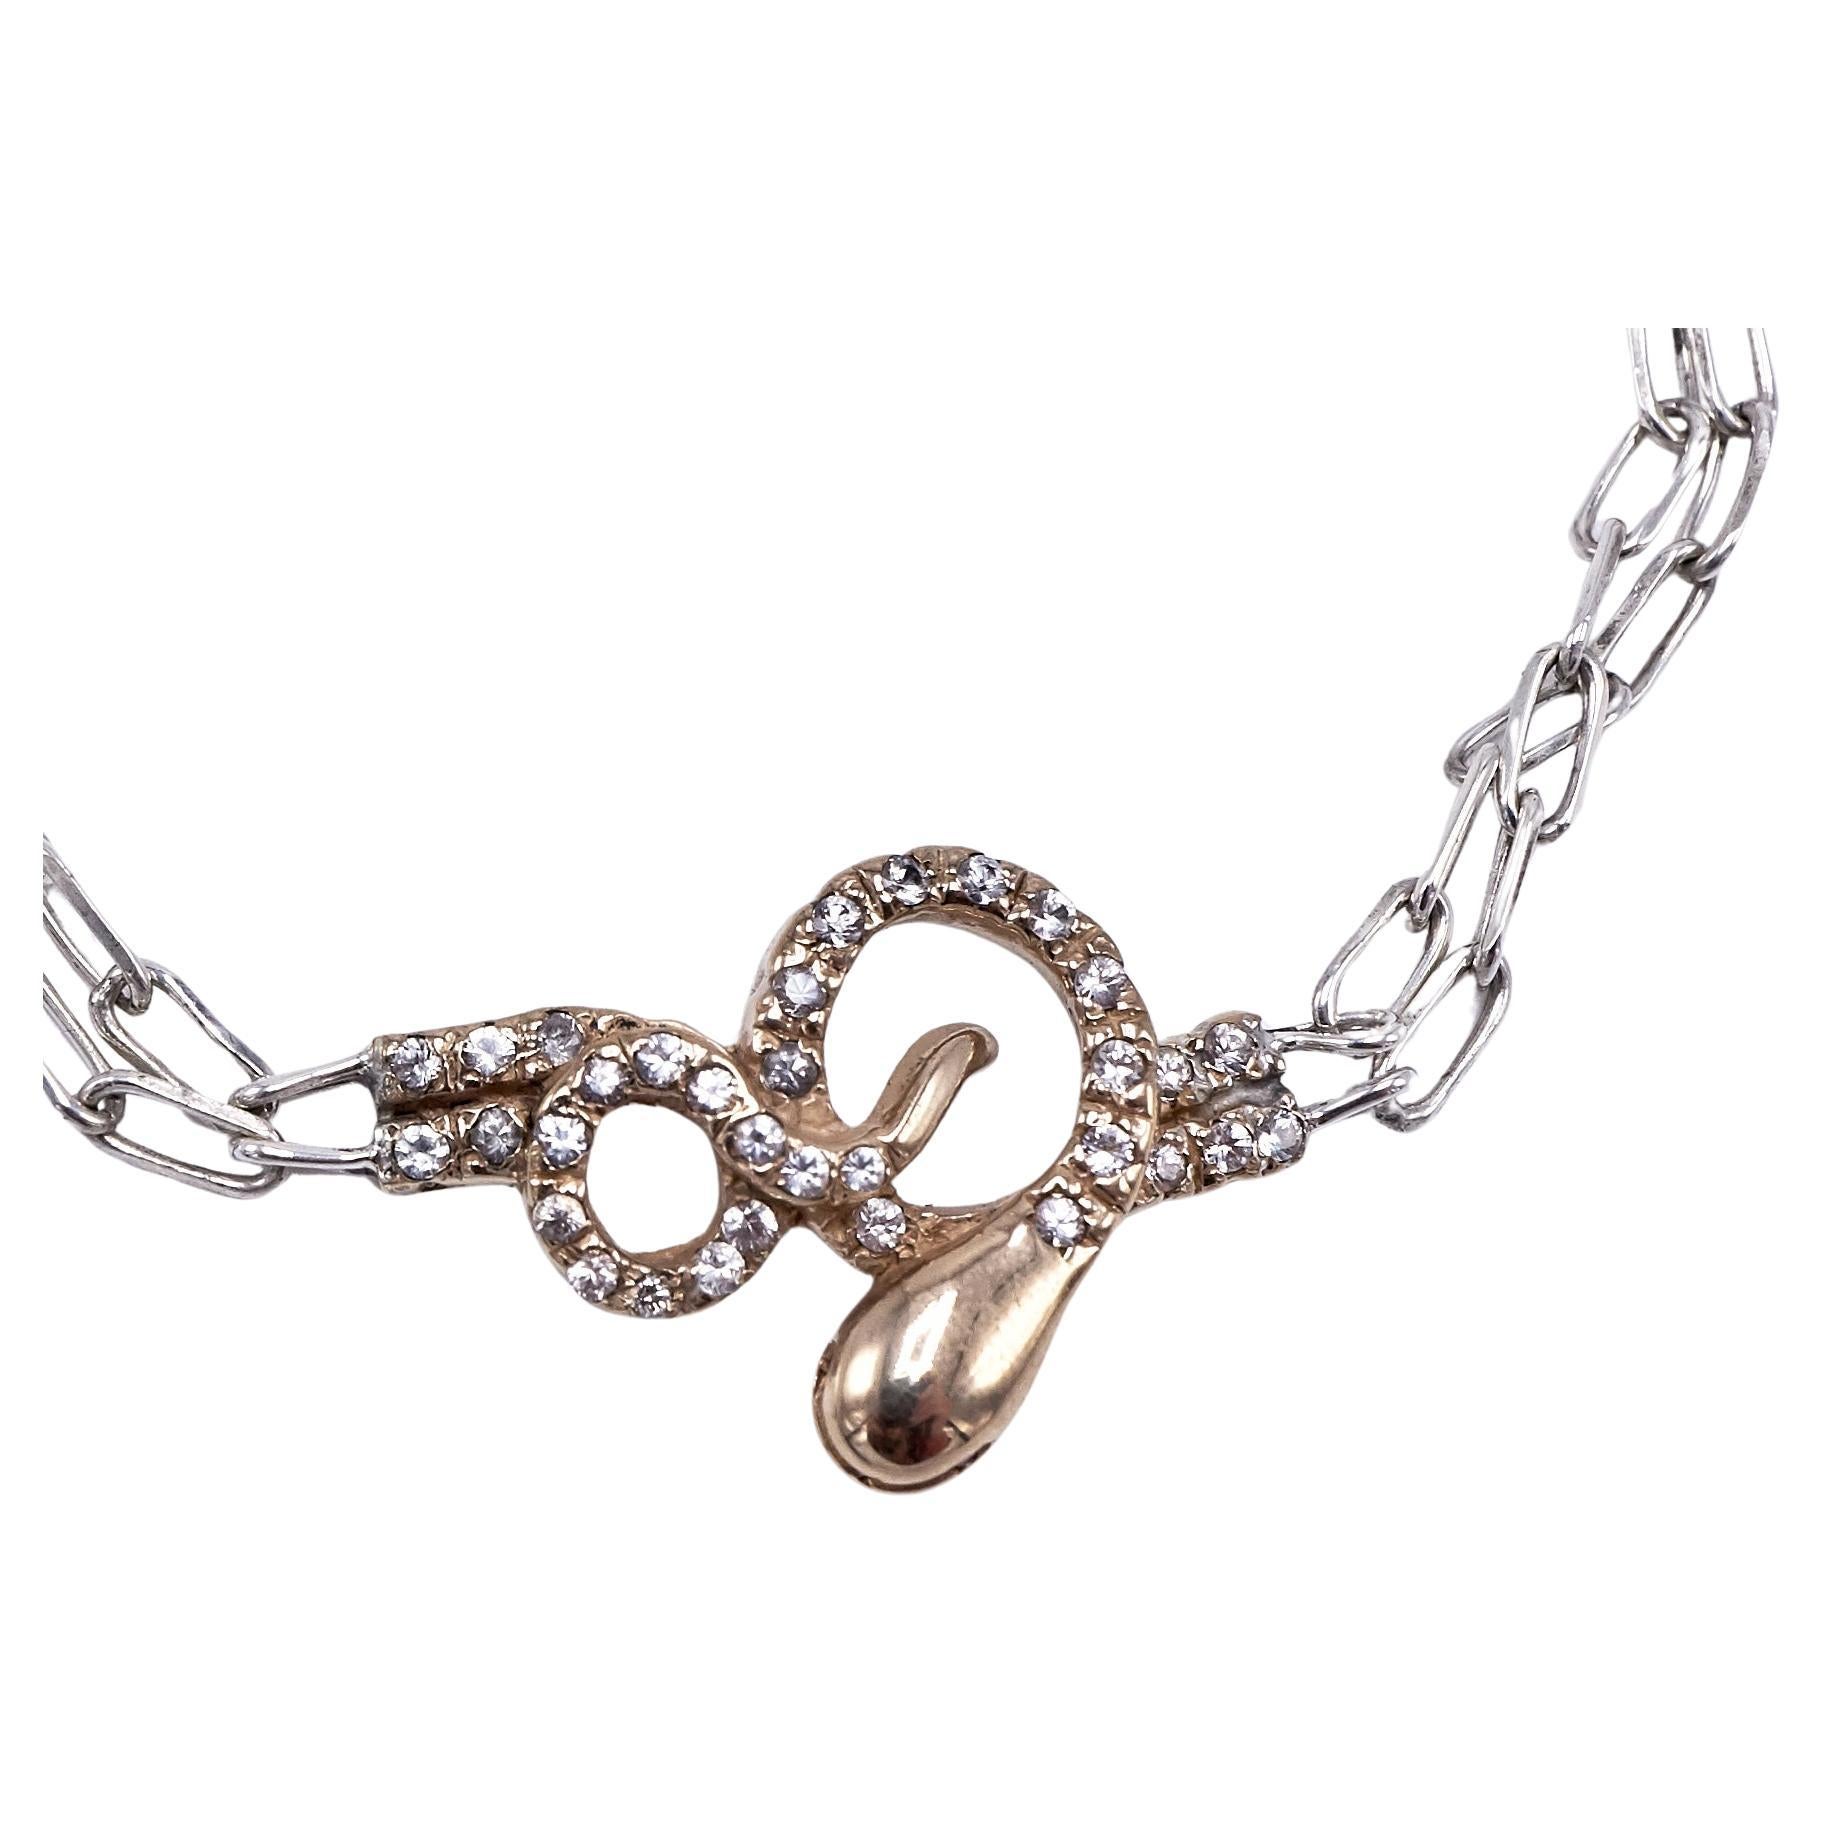 White Diamond Gold Snake Pendant Choker Chain Necklace Silver Ruby Eyes For Sale